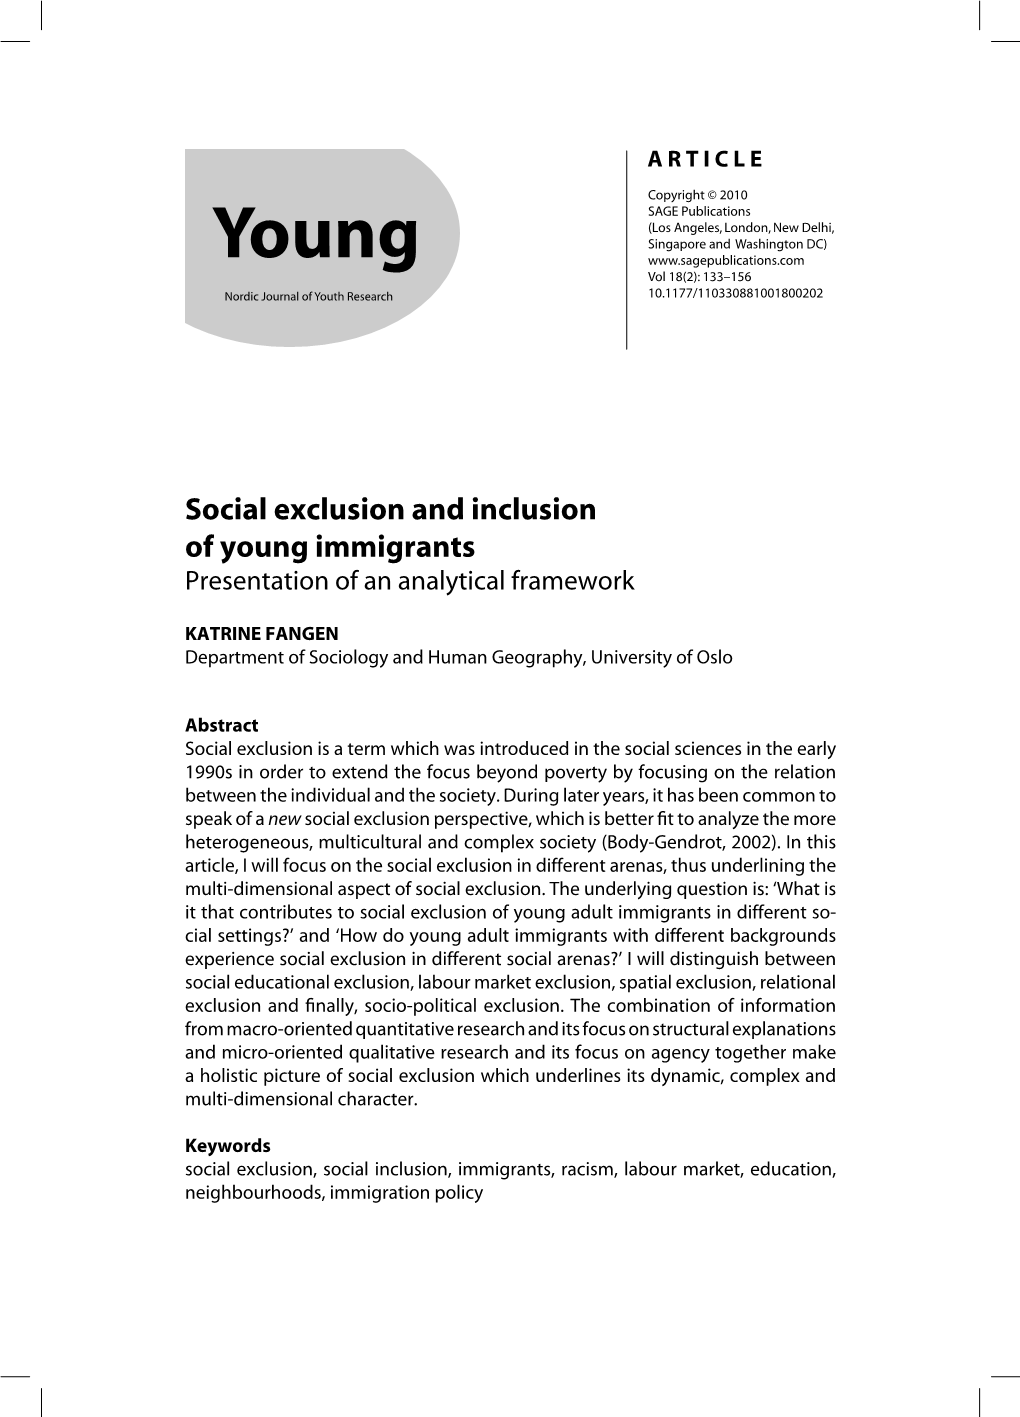 Social Exclusion and Inclusion of Young Immigrants Presentation of an Analytical Framework